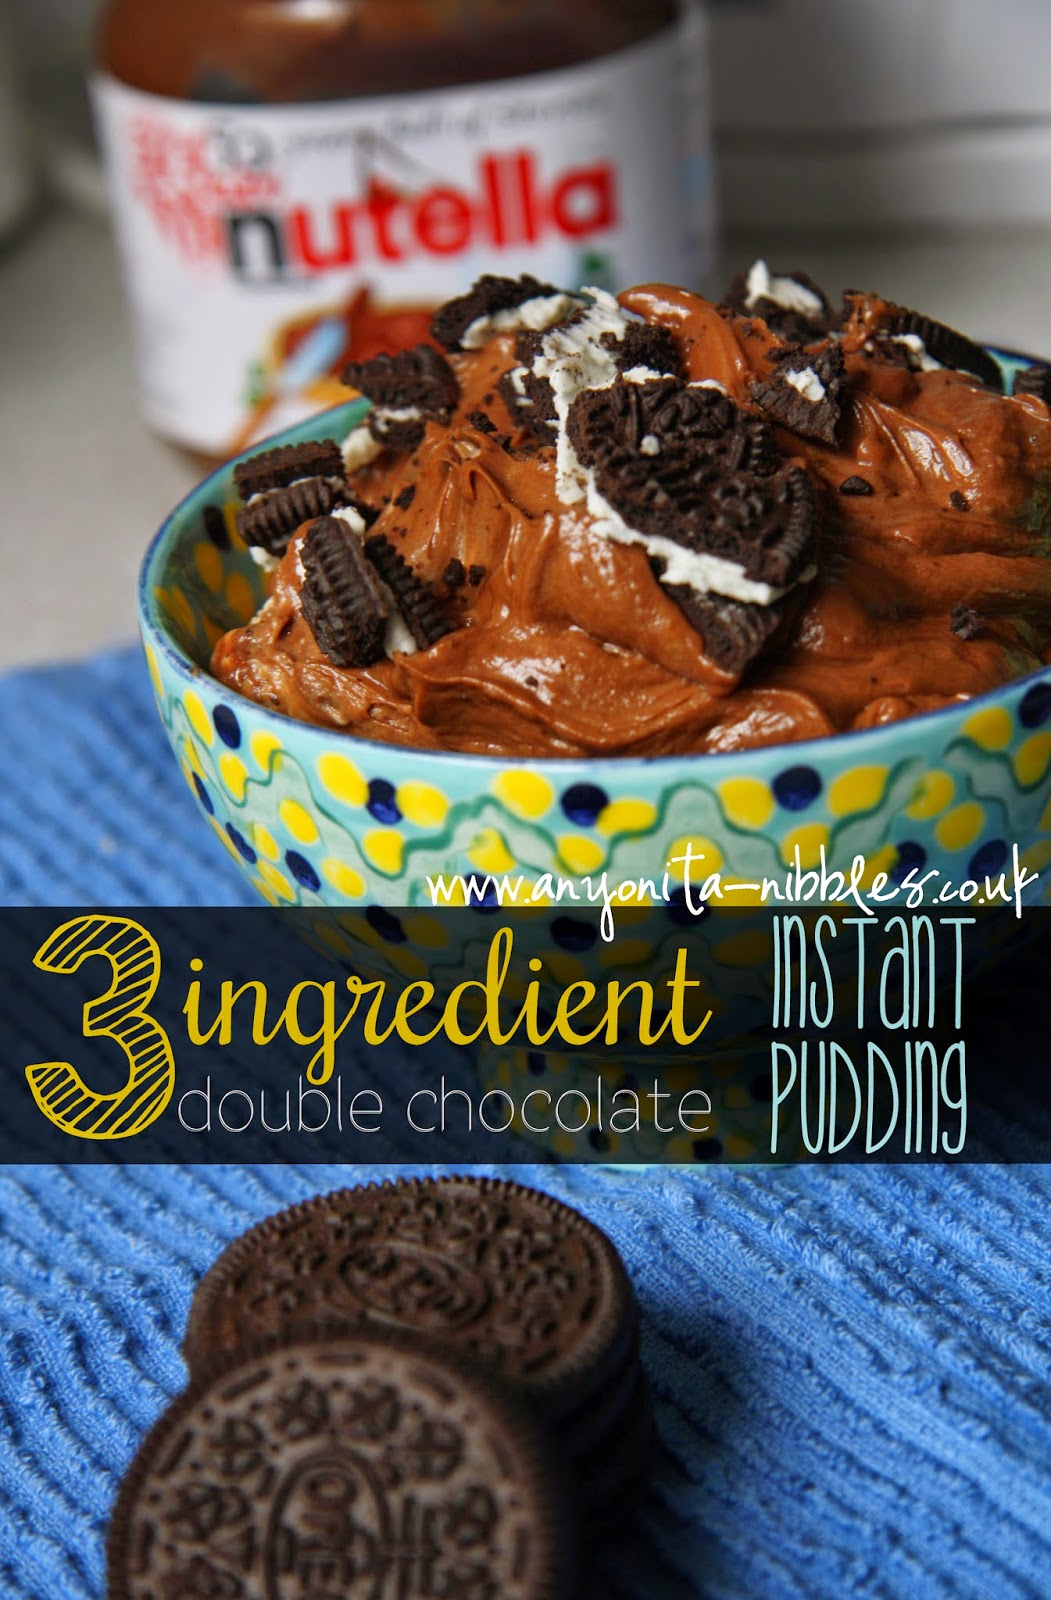 3 ingredient double #chocolate instant pudding recipe #easydesserts from www.anyonita-nibbles.co.uk